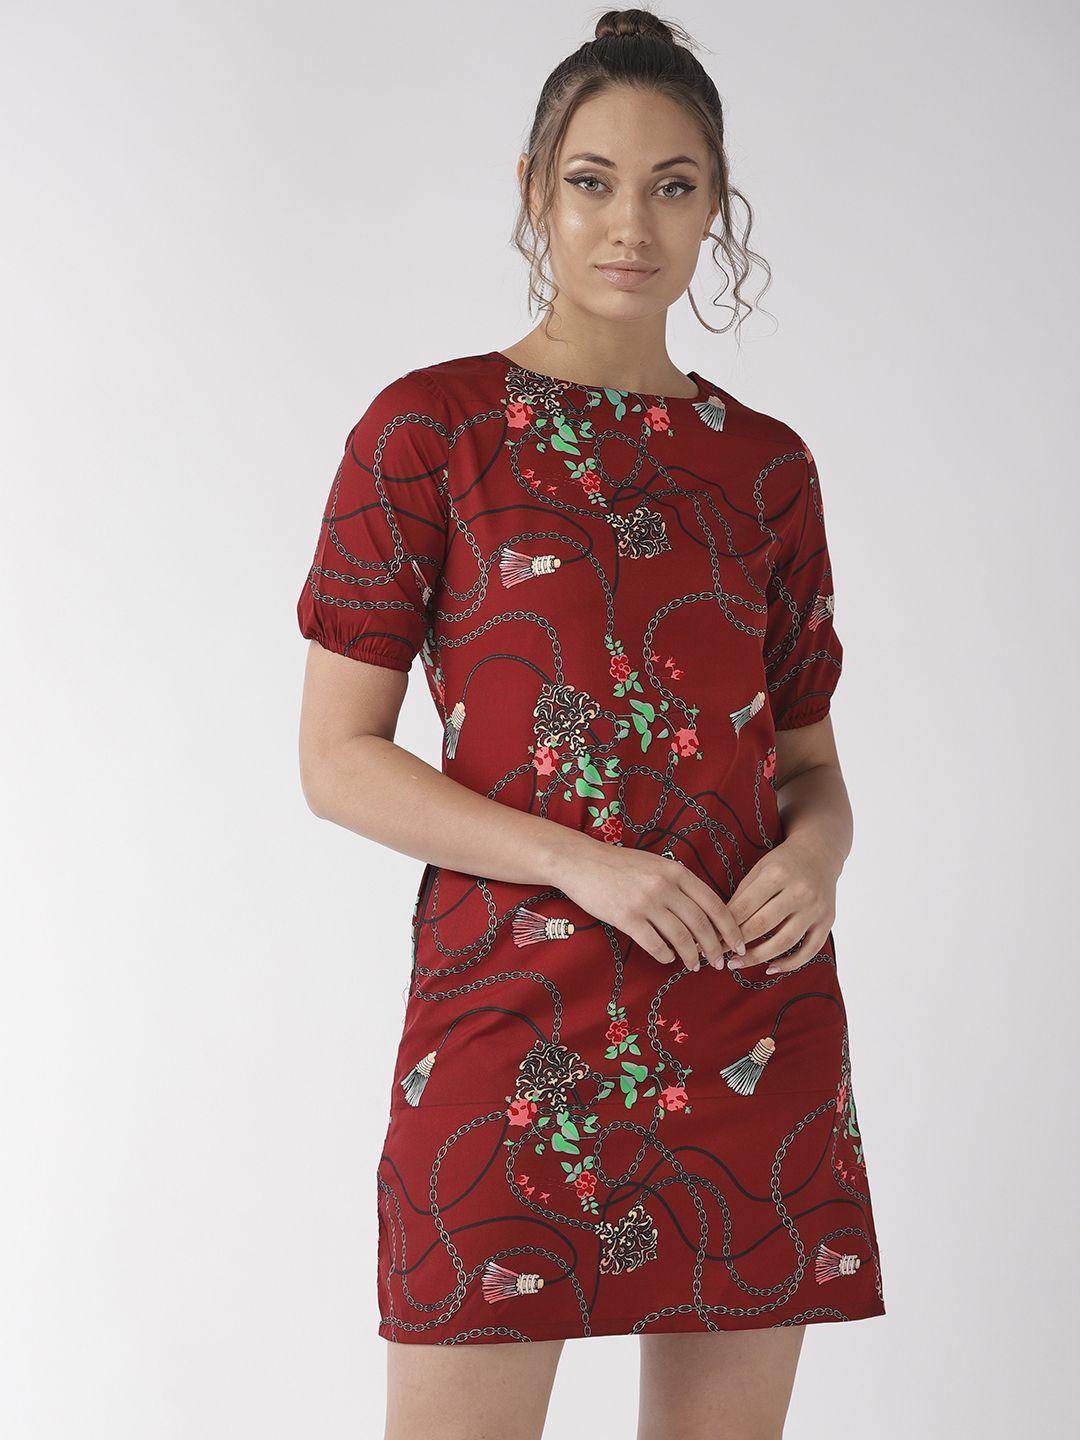 style quotient women maroon floral printed sheath dress